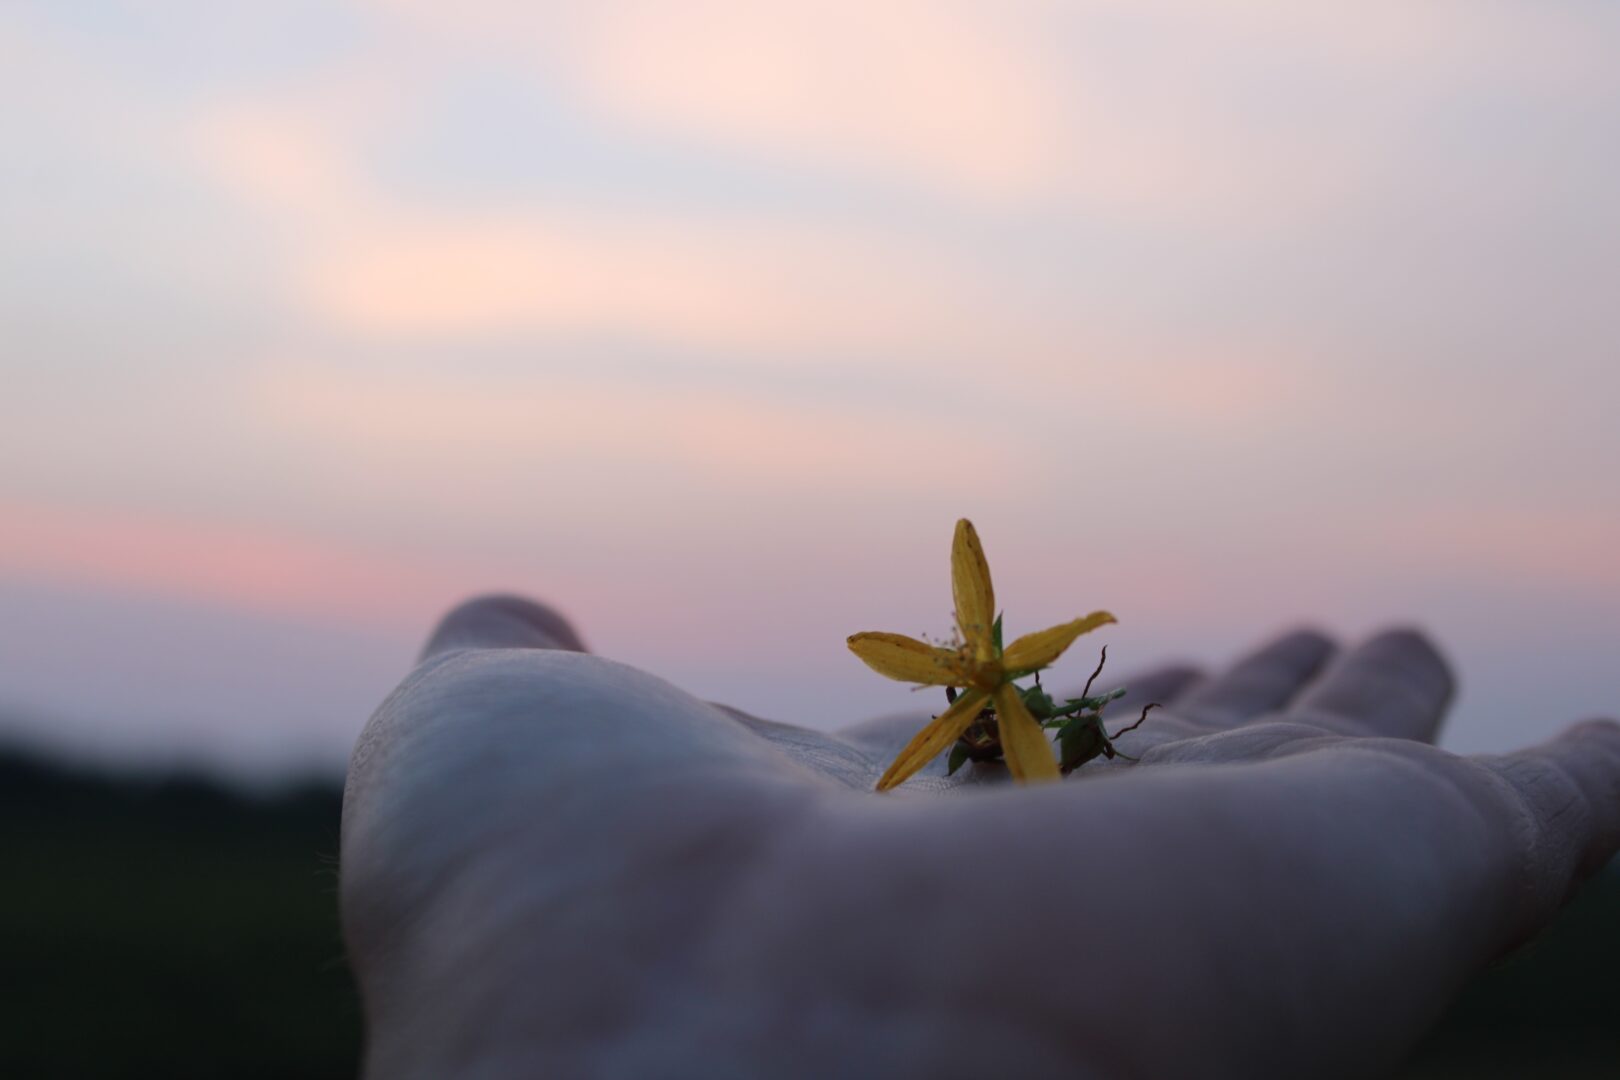 A flower on the palm